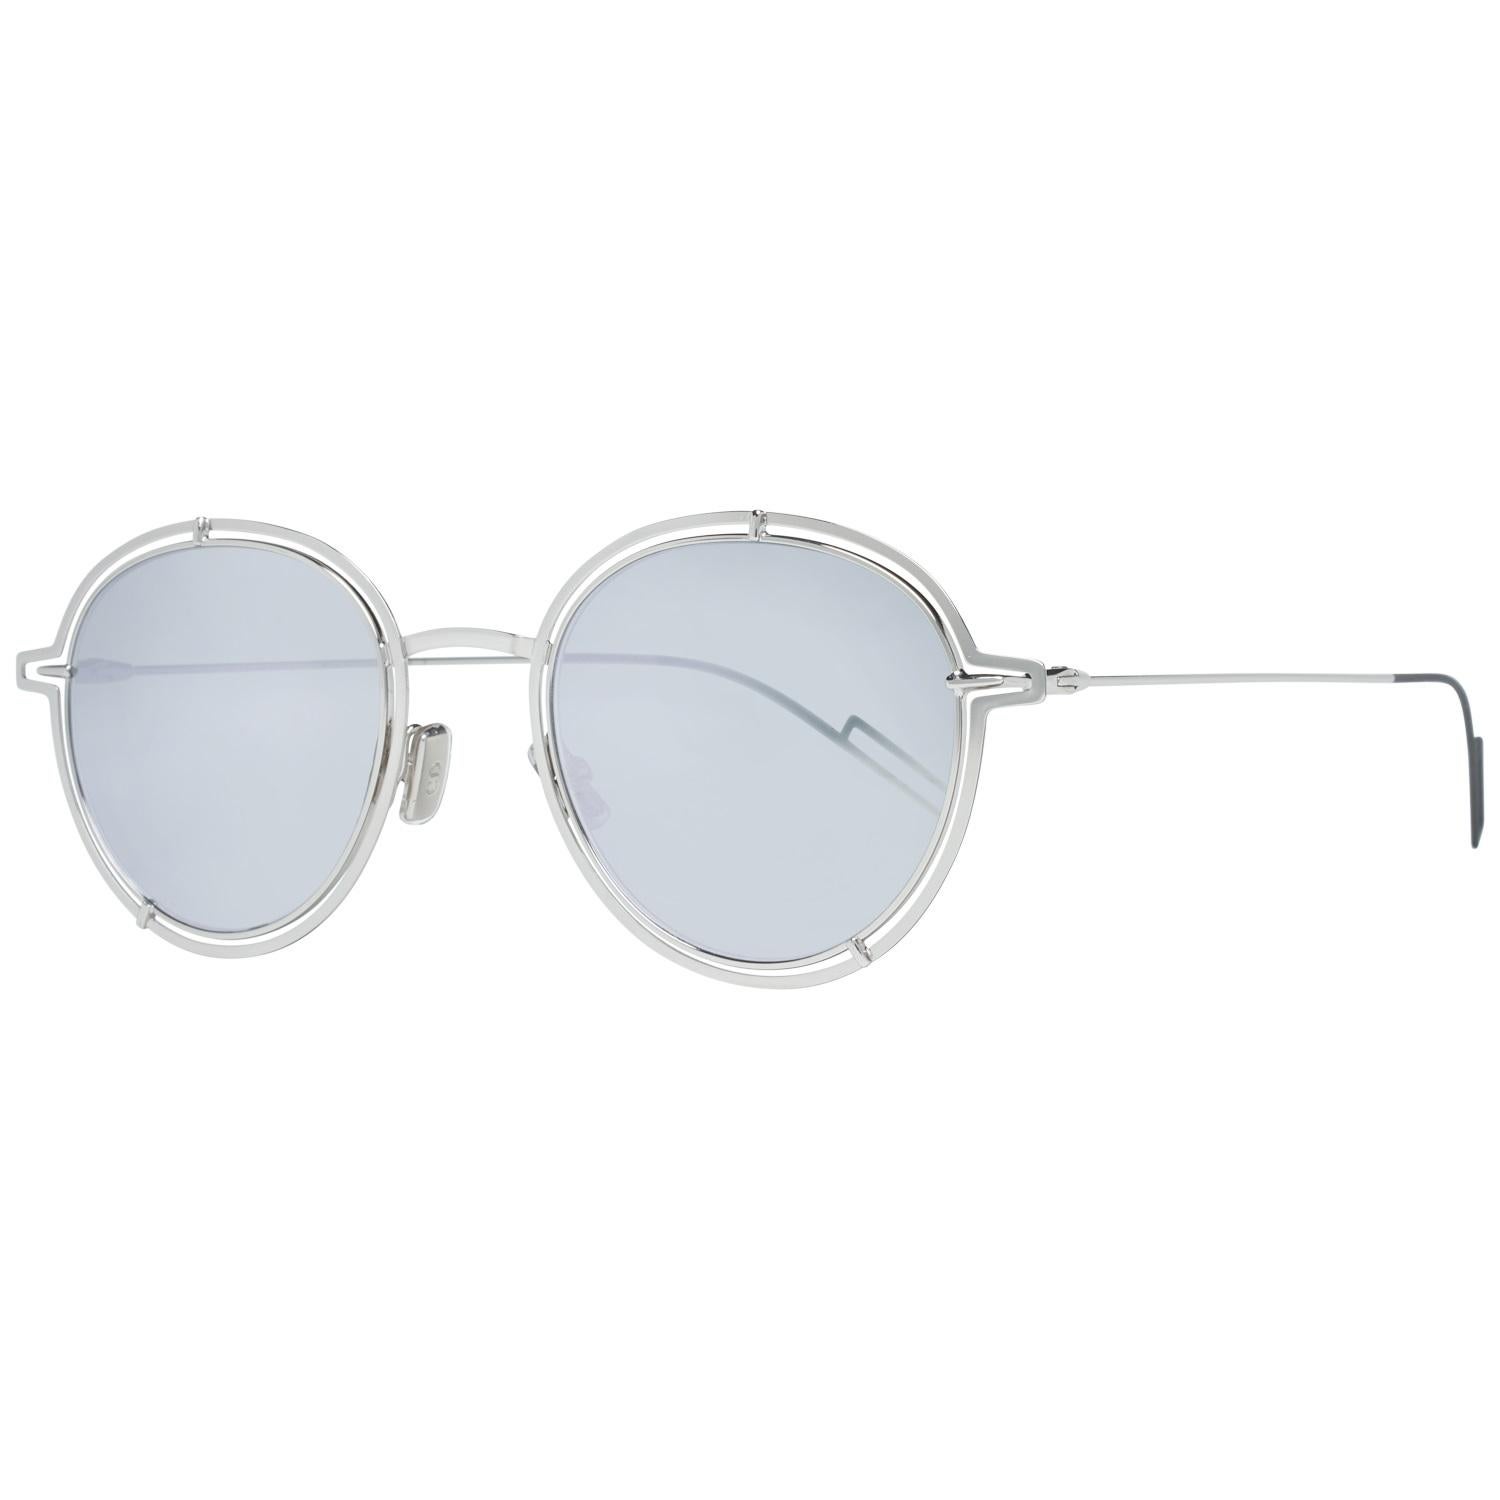 Details

MATERIAL: Metal

COLOR: Silver

MODEL: DIOR0210S 49010

GENDER: Women

COUNTRY OF MANUFACTURE: Italy

TYPE: Sunglasses

ORIGINAL CASE?: Yes

STYLE: Round

OCCASION: Casual

FEATURES: Lightweight

LENS COLOR: Silver

LENS TECHNOLOGY: